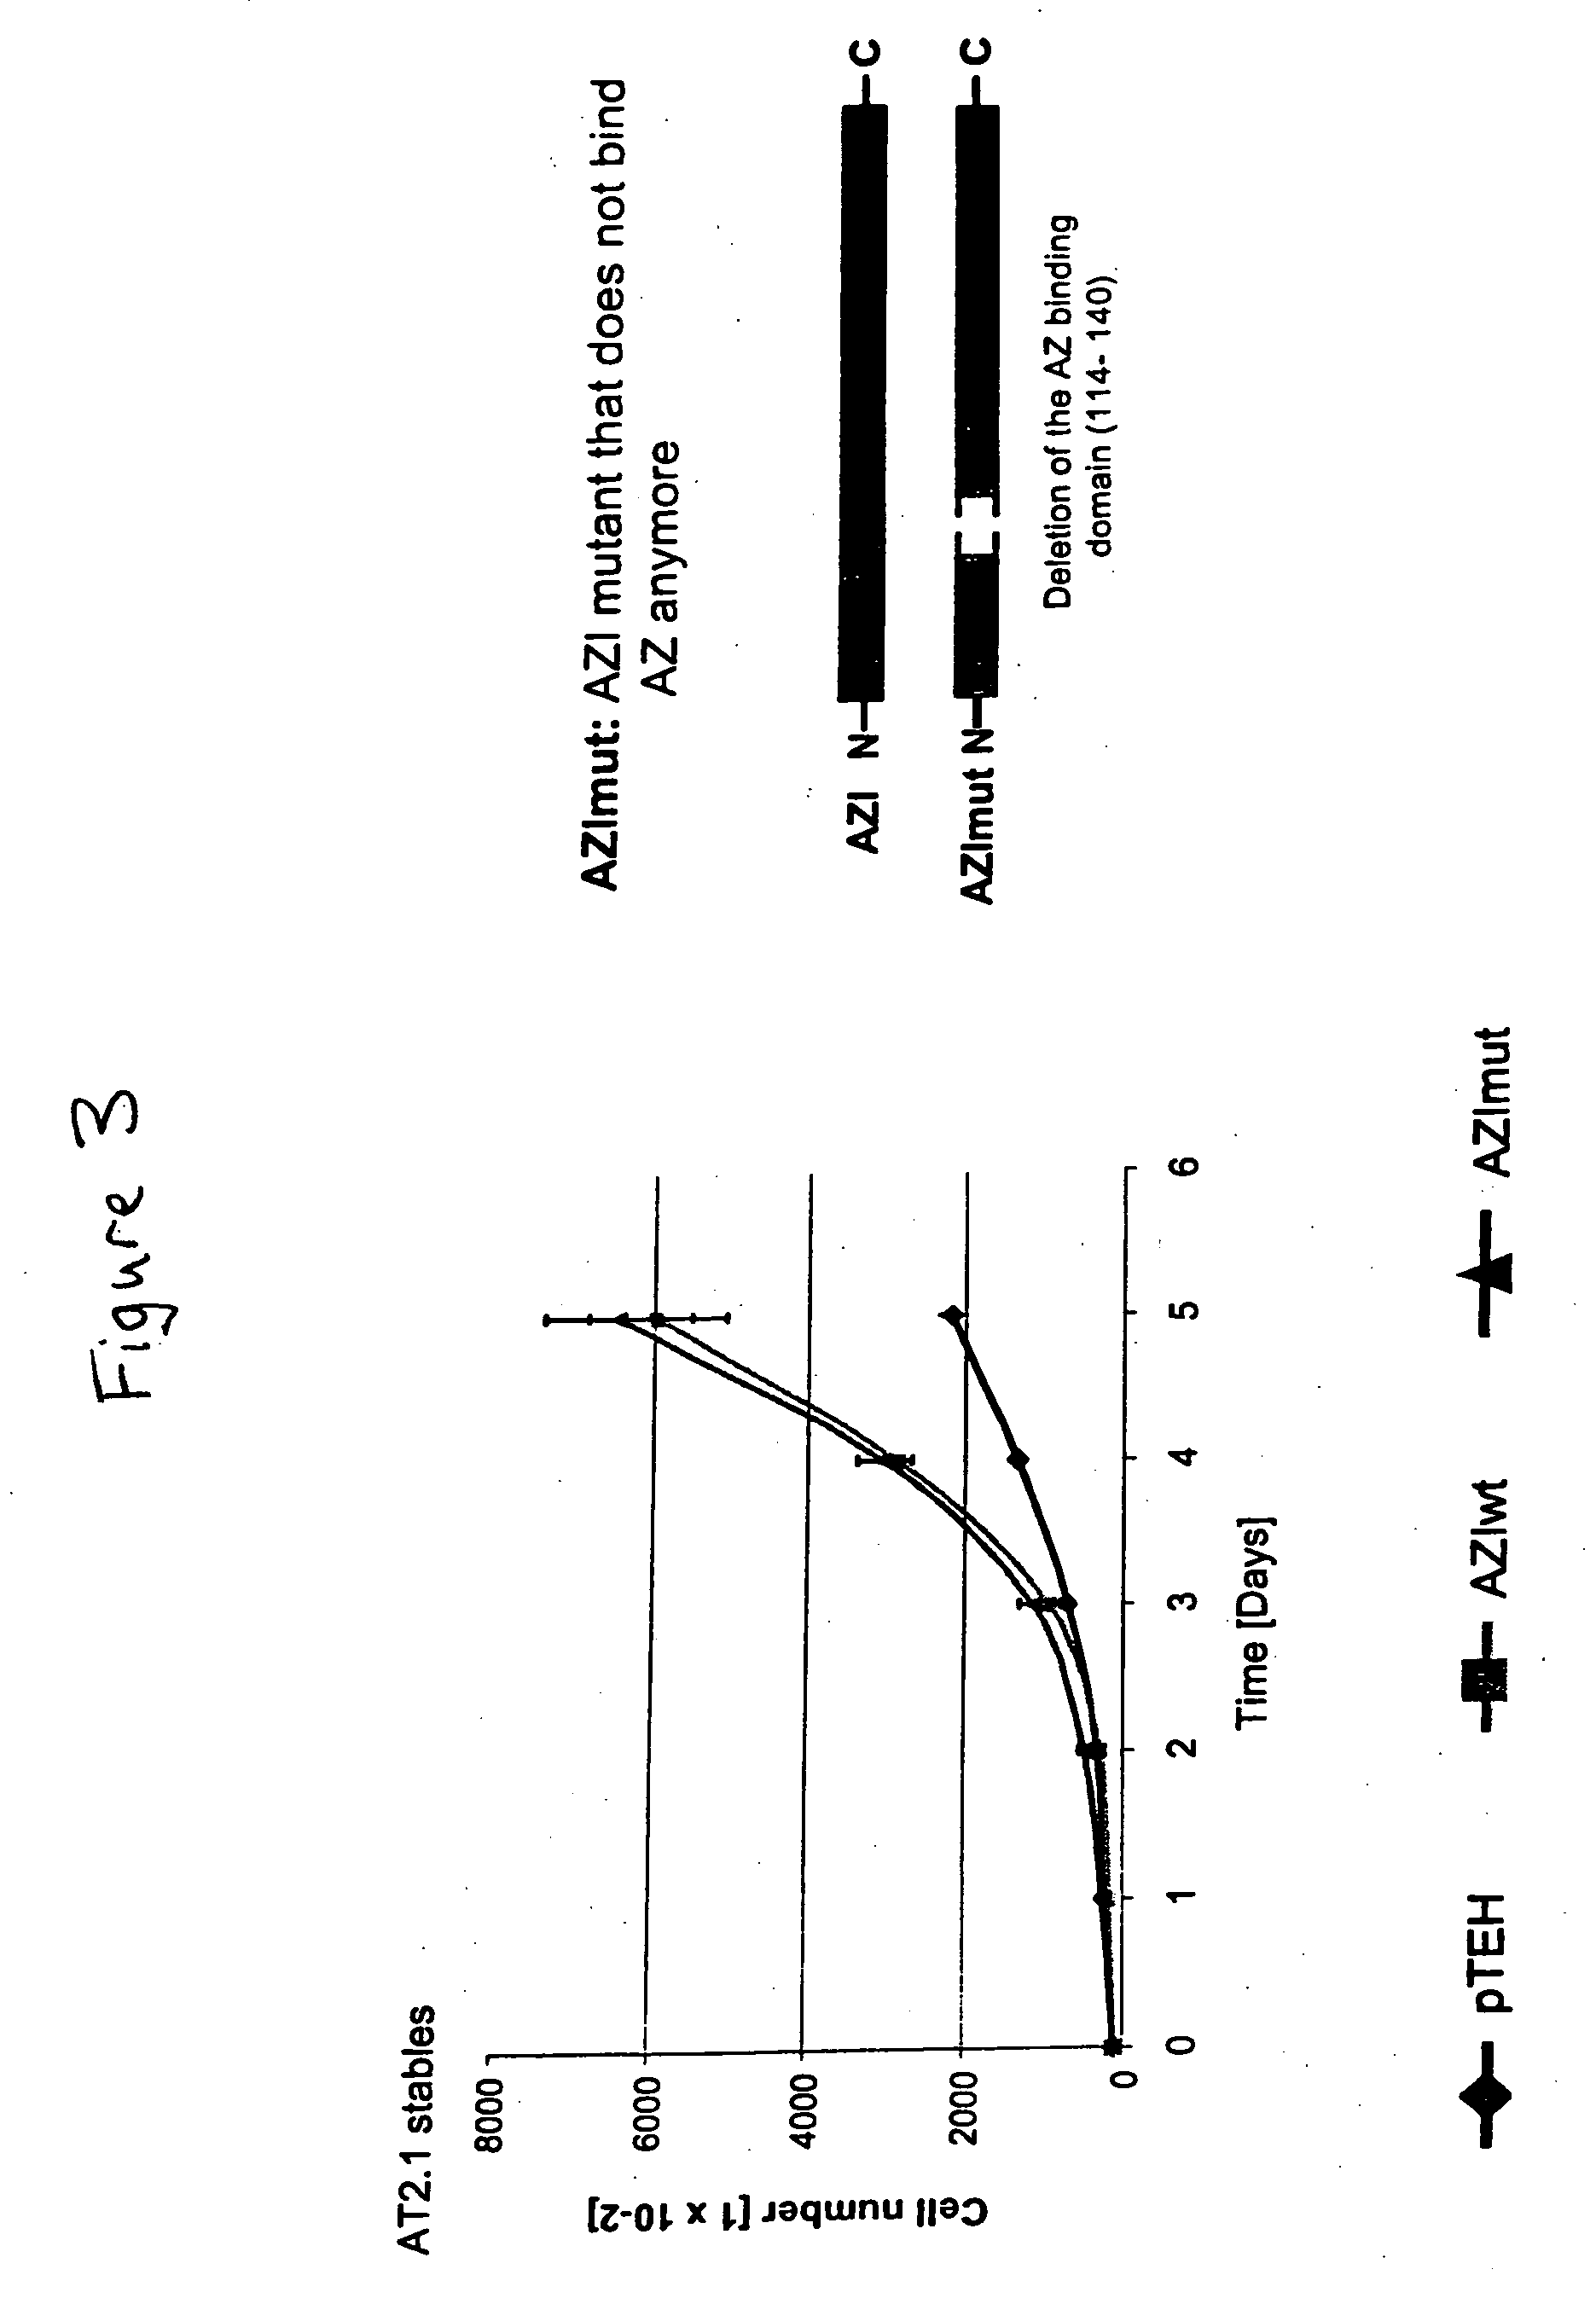 Methods for the treatment, diagnosis, and prognosis of cancer